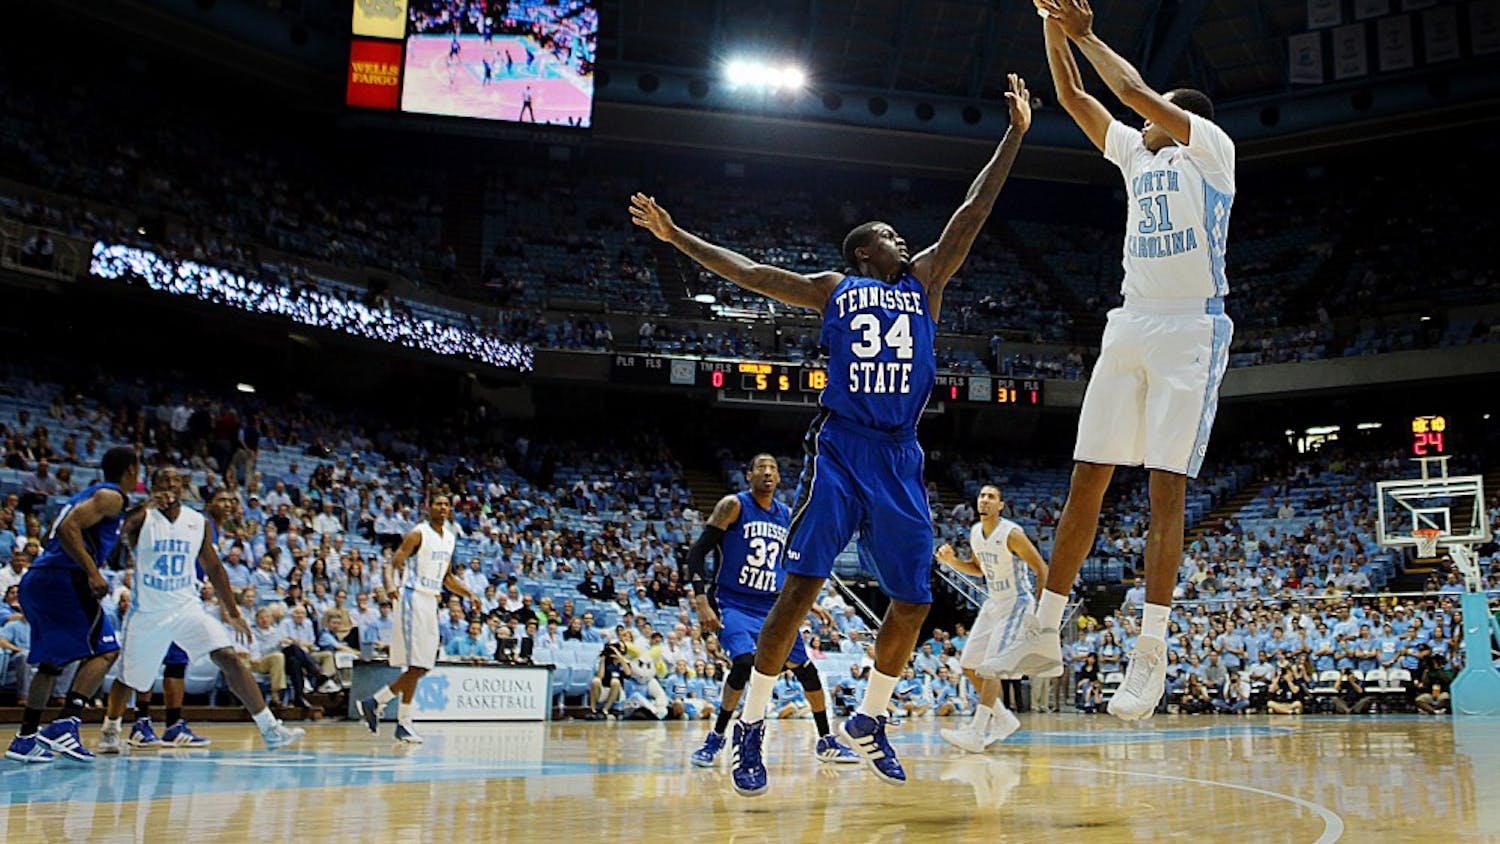 UNC forward John Henson shoots a jump shot during the game against Tennessee State.